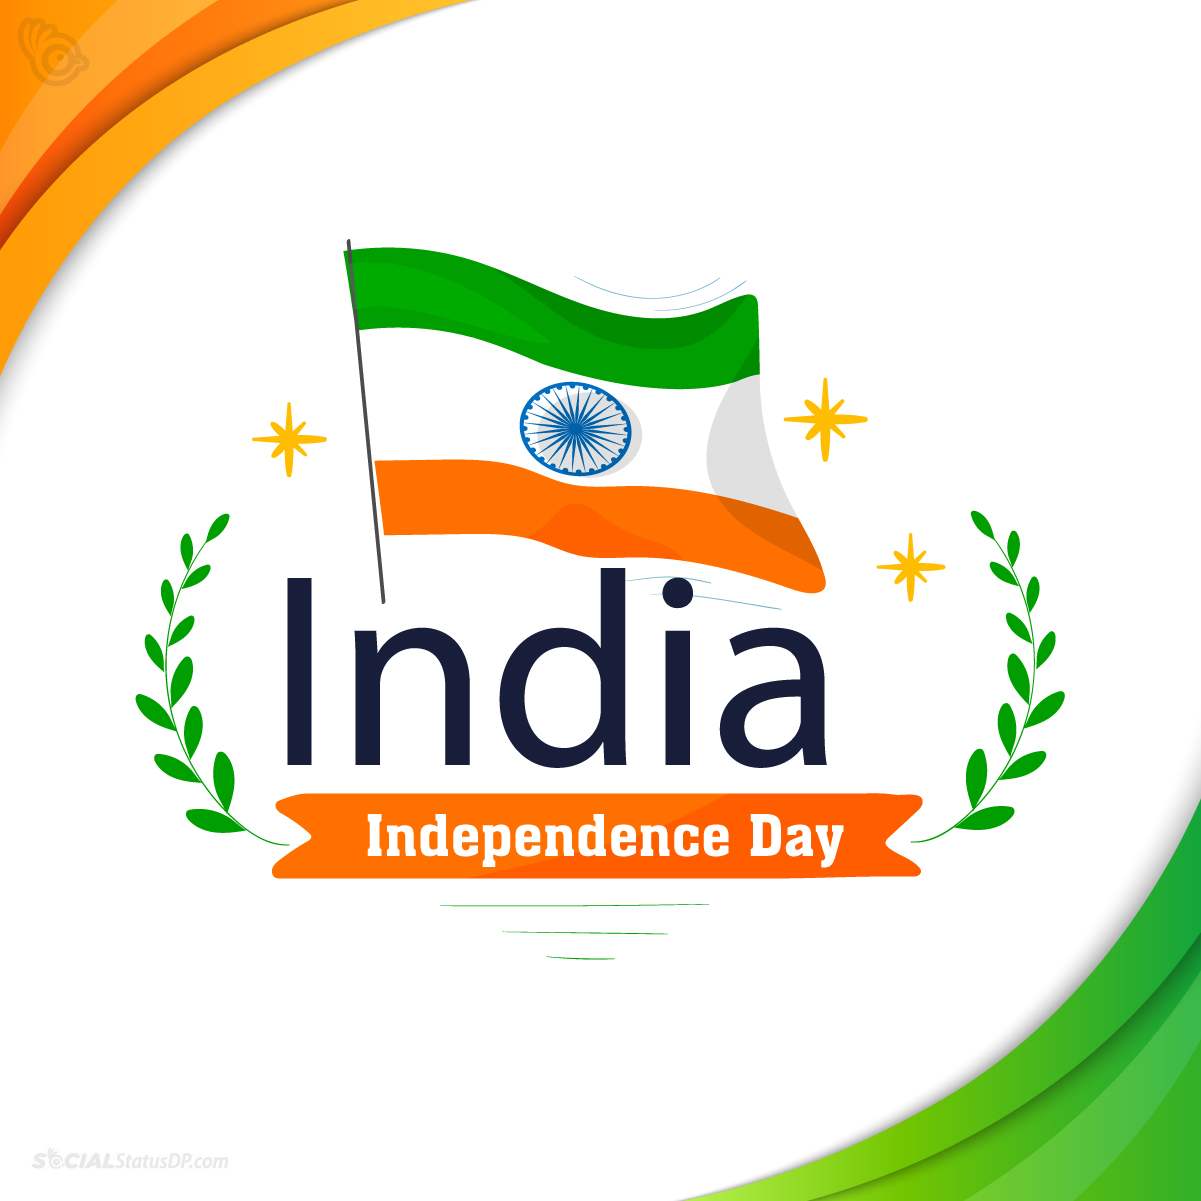 Happy 75th Independence Day 2021 Wishes, Image, Quotes, Messages